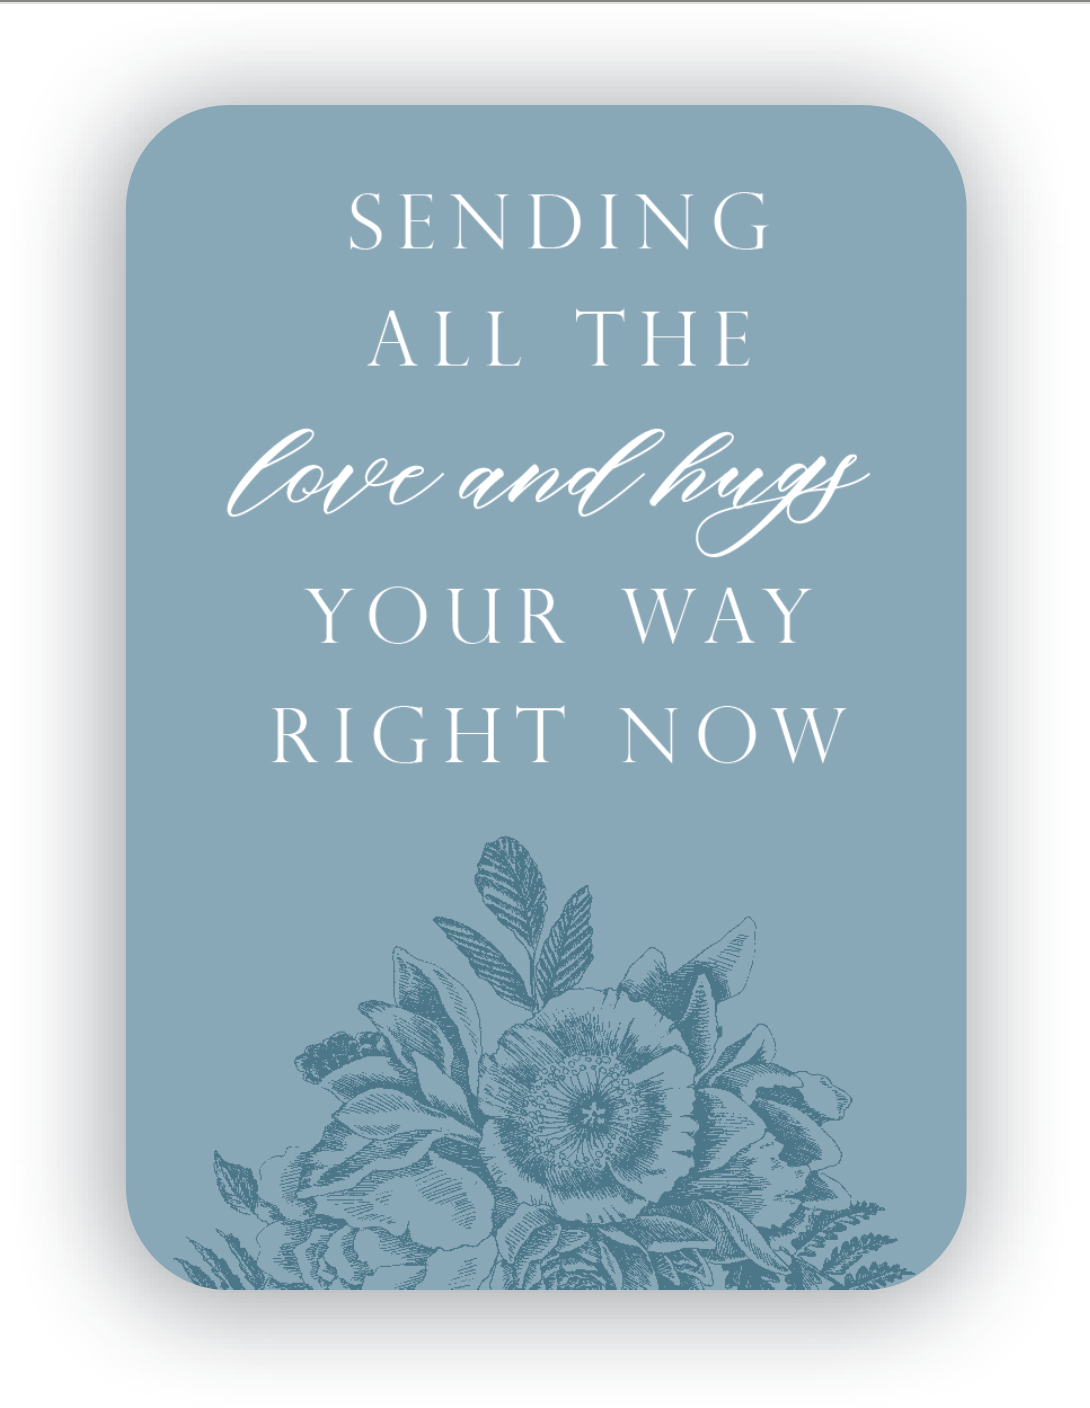 Digital dusty blue mini card with florals that says "Sending all the love and hugs your way right now" by Rust Belt Love